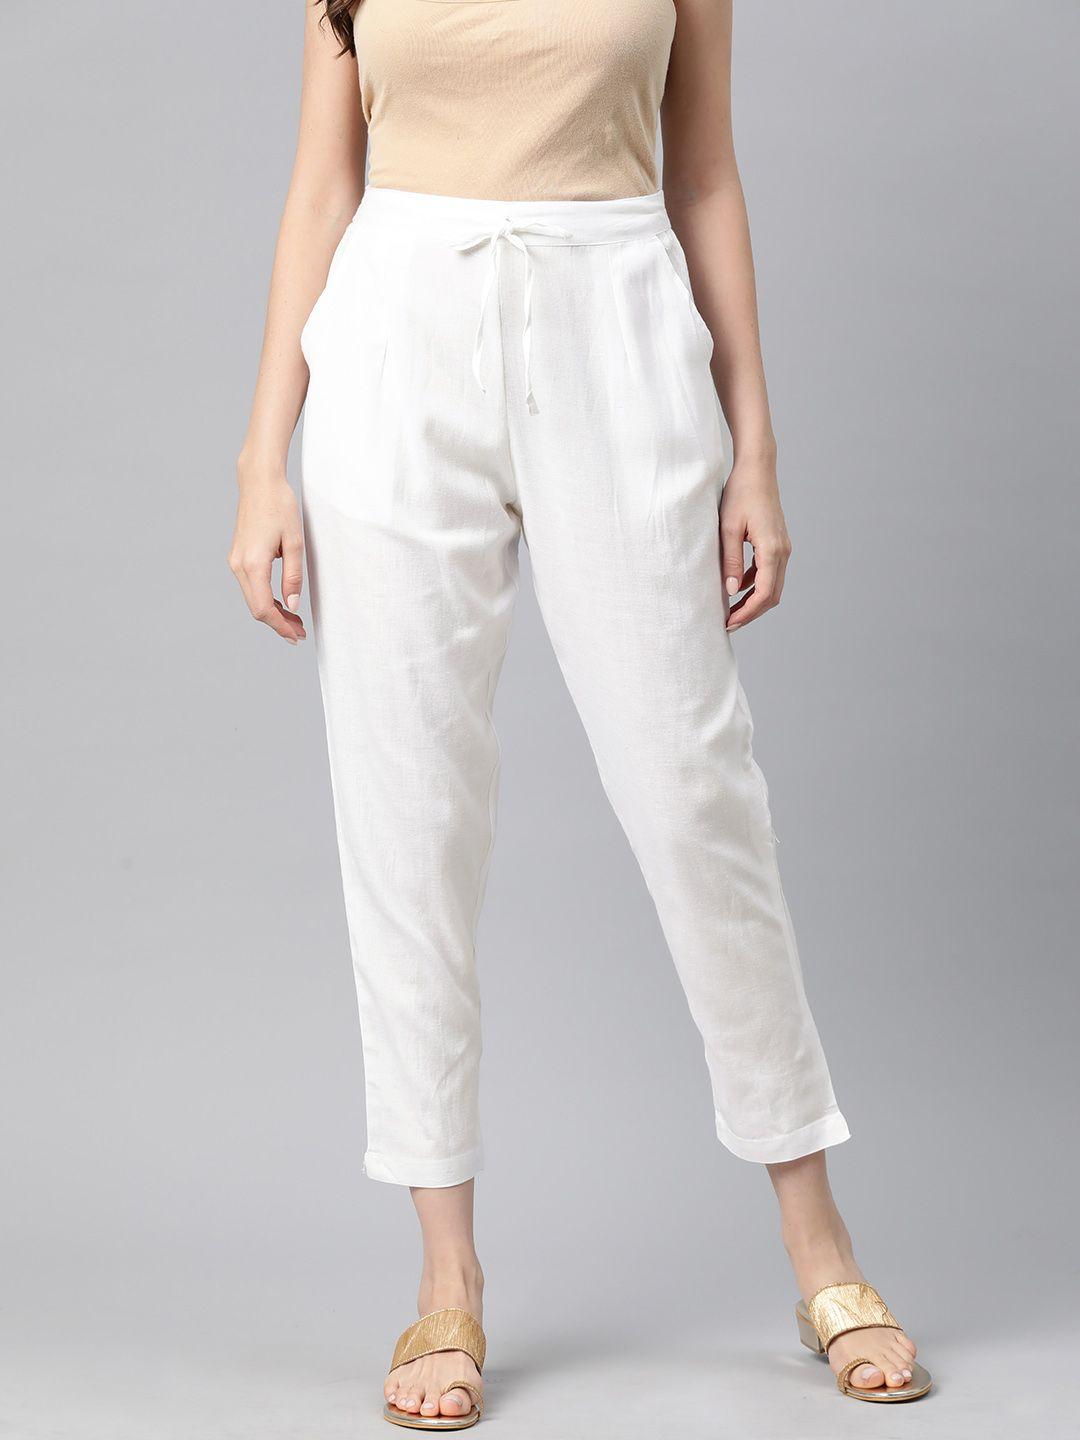 readiprint fashions pleated cropped trousers